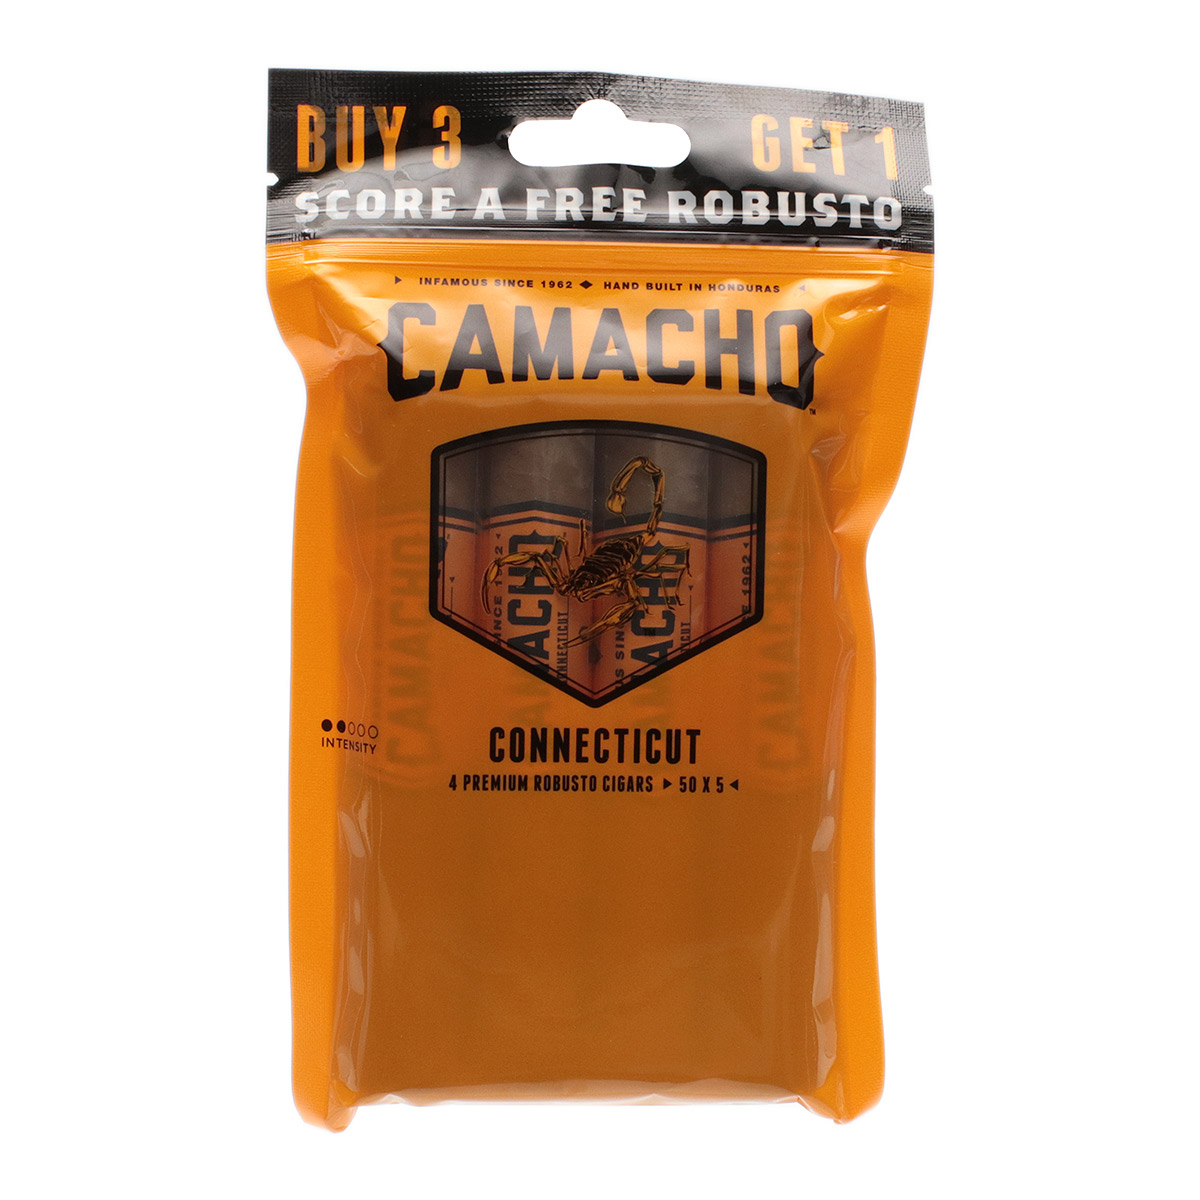 Camacho Fresh Pack Connecticut Robusto (4 Pack)